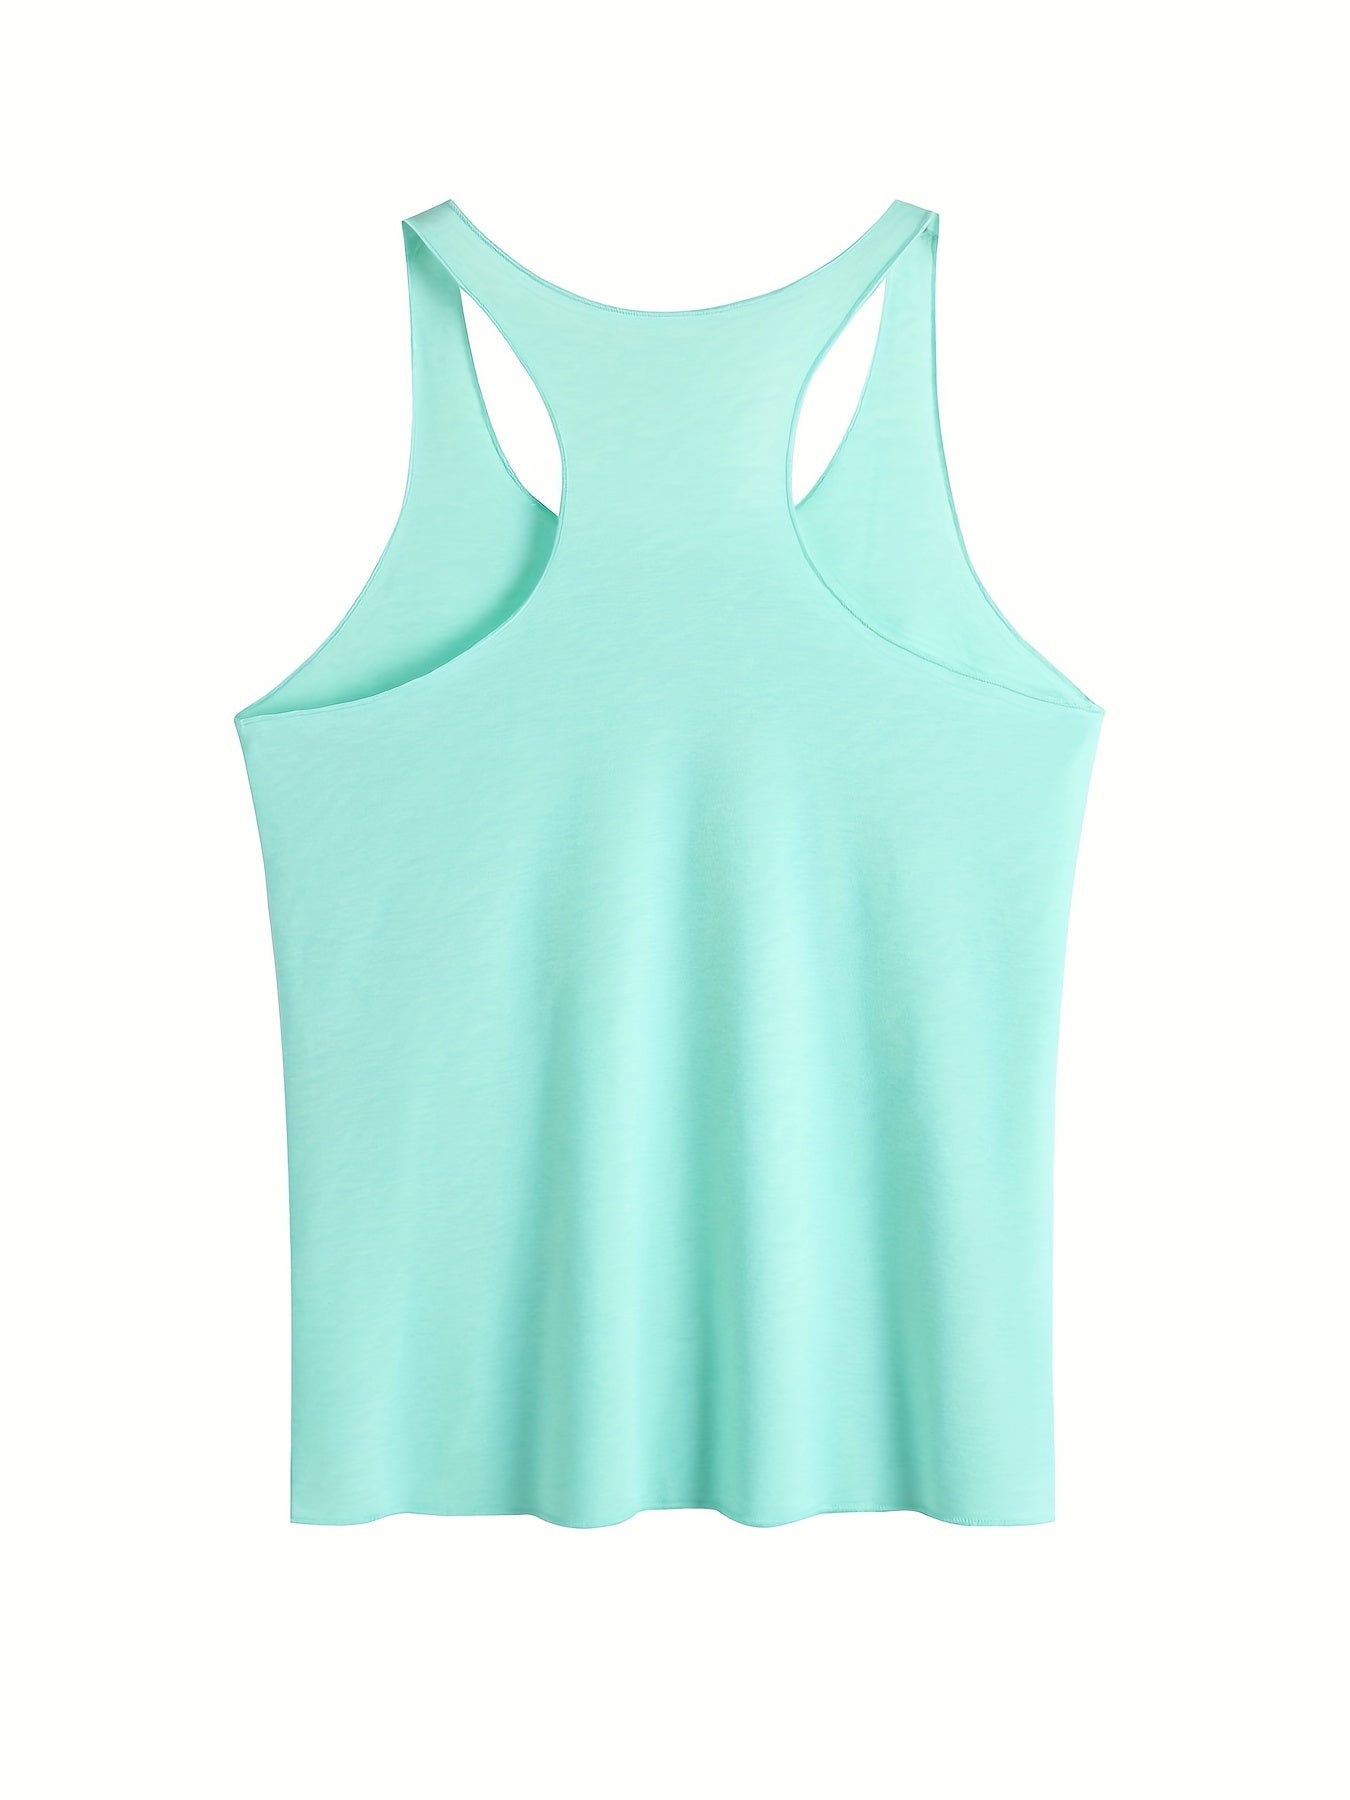 Letter Print Tank Top For Women, Fashionable Sleeveless Racer Back Sports Casual Top